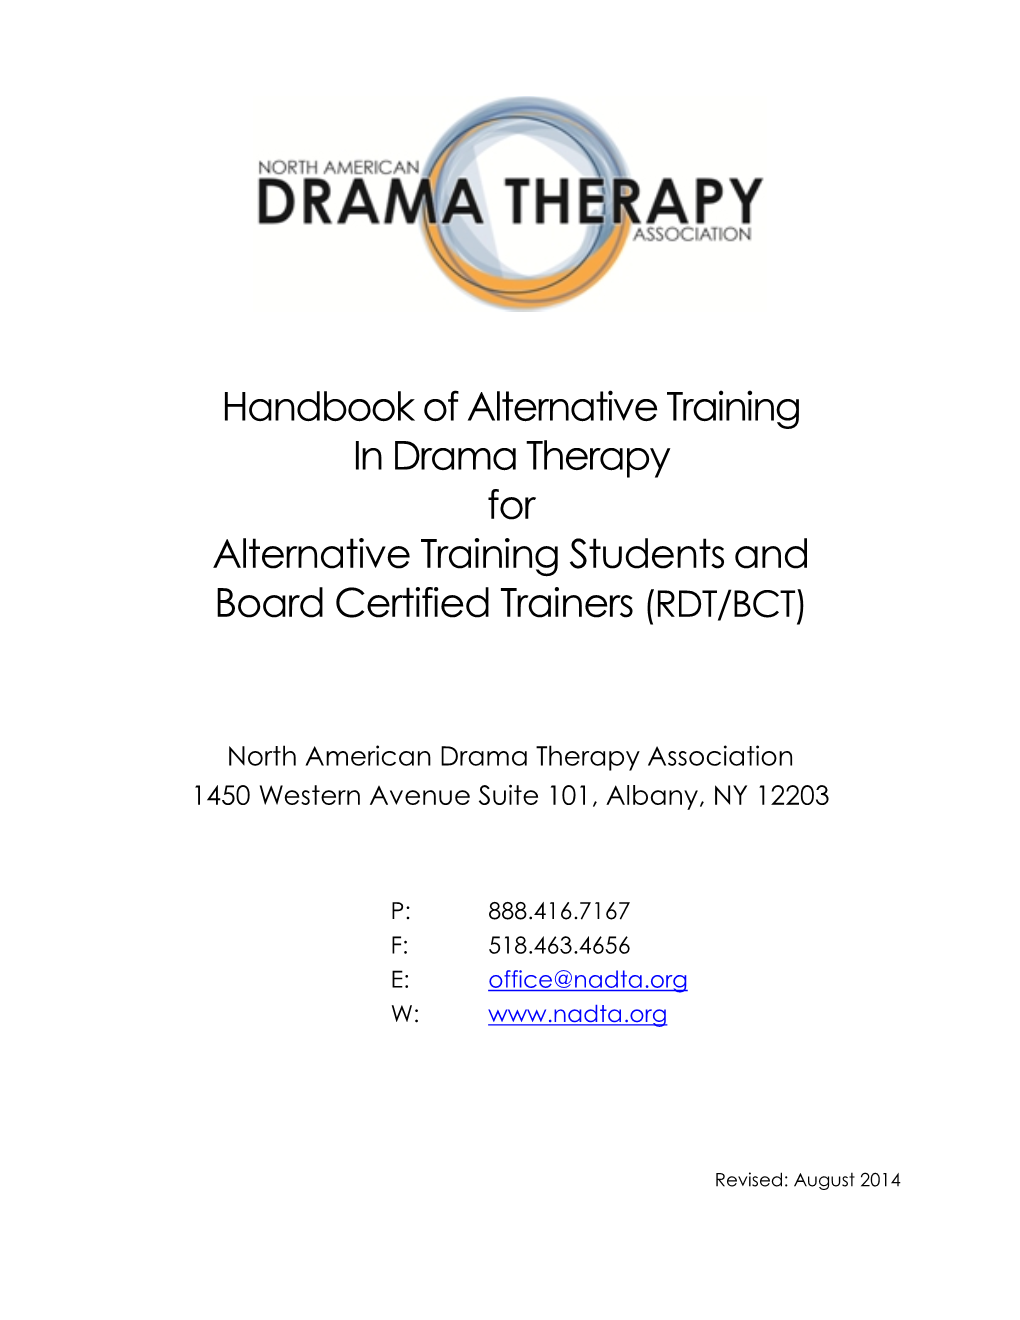 Handbook of Alternative Training in Drama Therapy for Alternative Training Students and Board Certified Trainers (RDT/BCT)